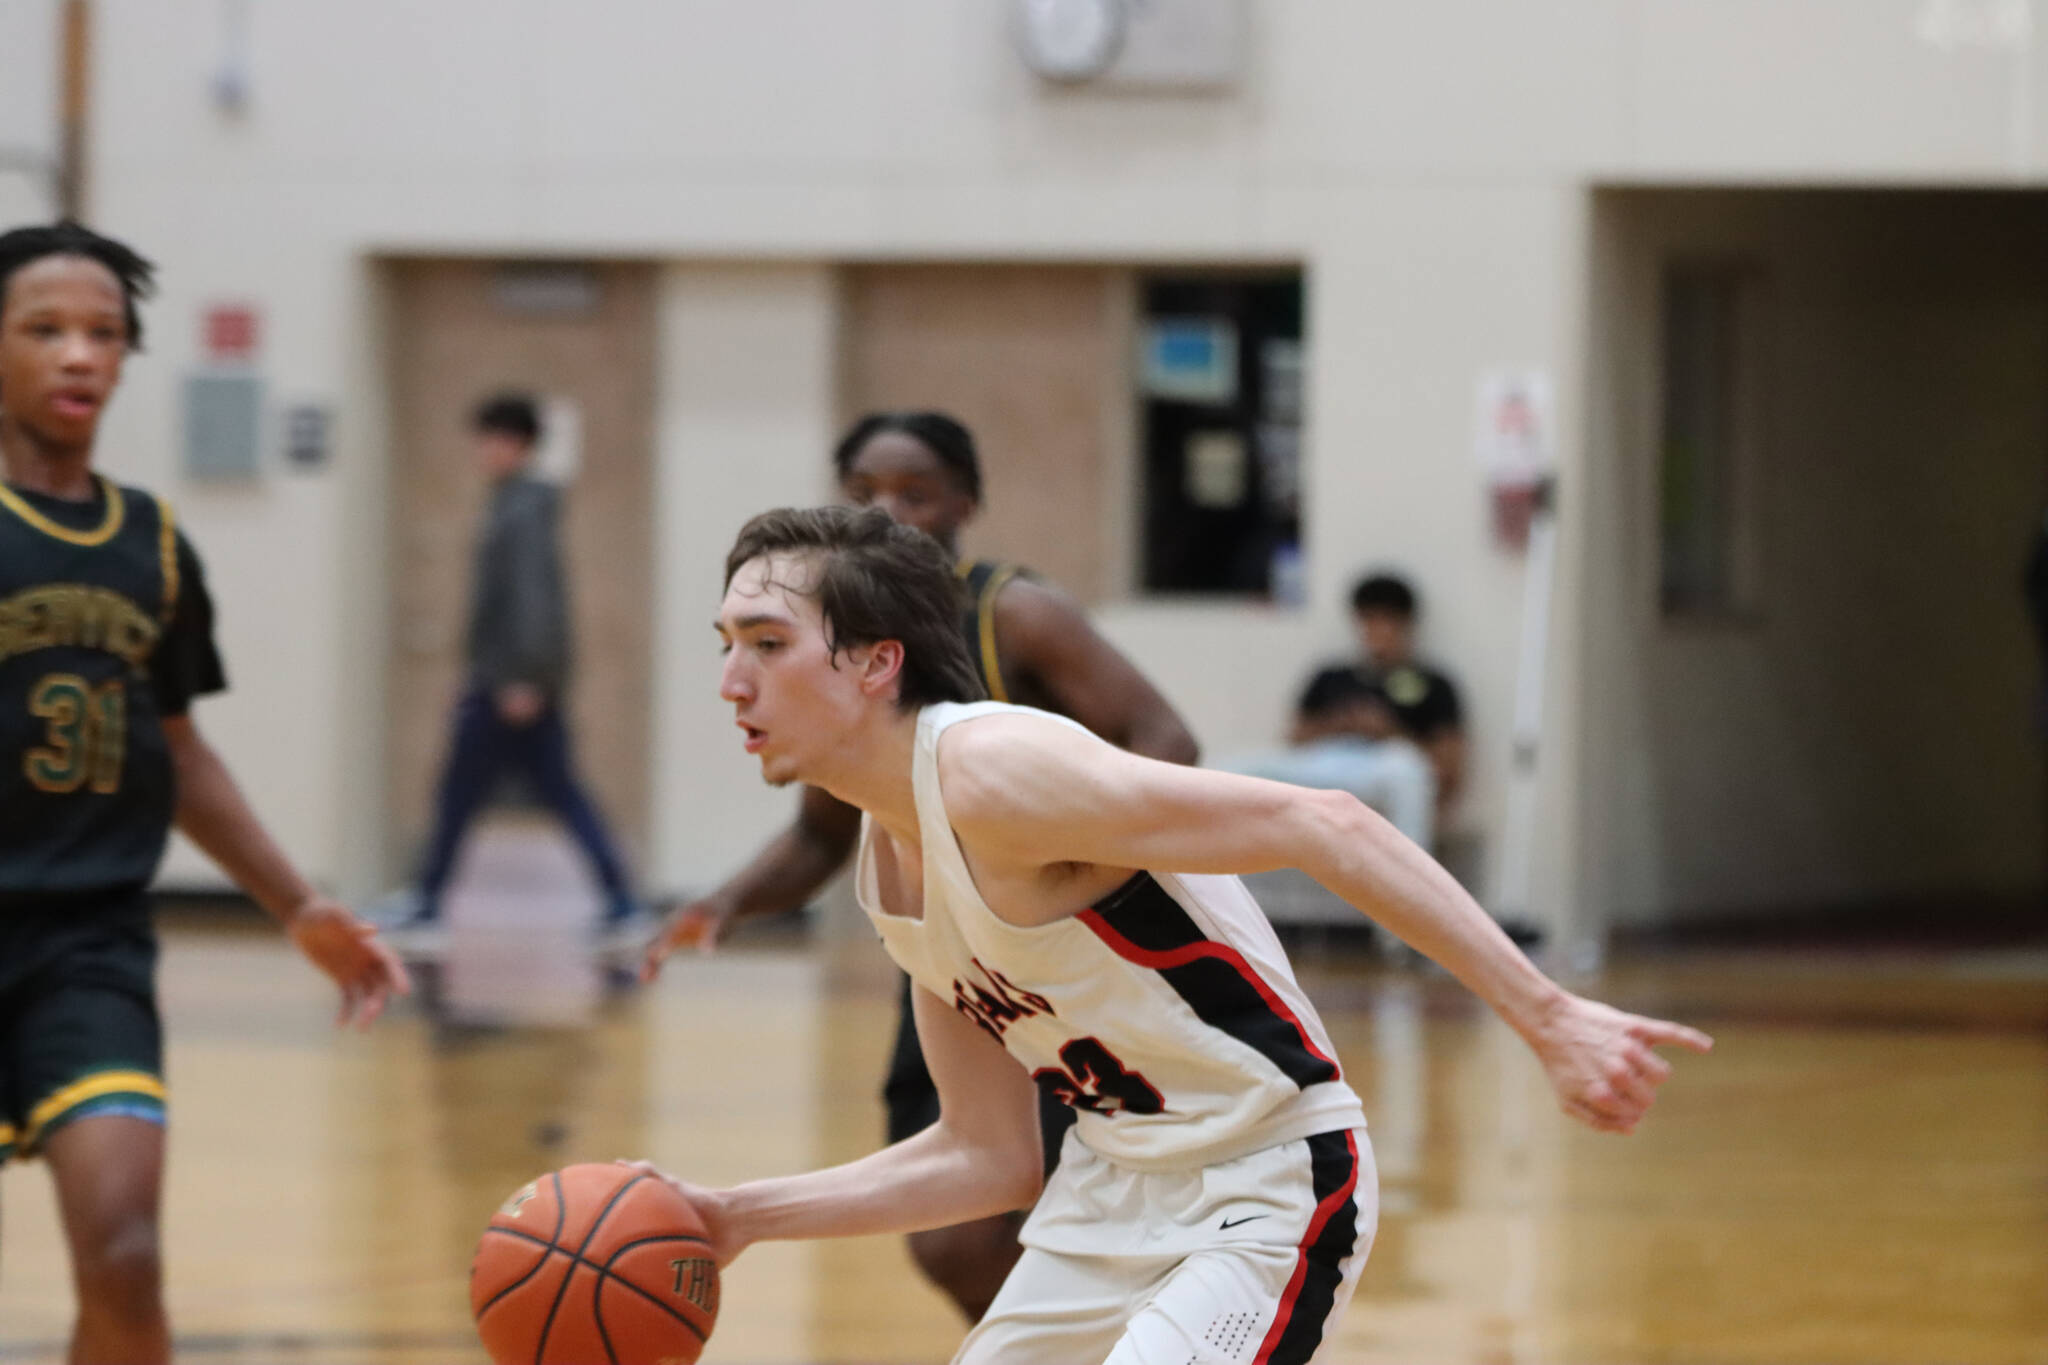 JDHS senior guard Joseph Aline takes the ball down court during one of two games against Service High School this week. (Jonson Kuhn / Juneau Empire)